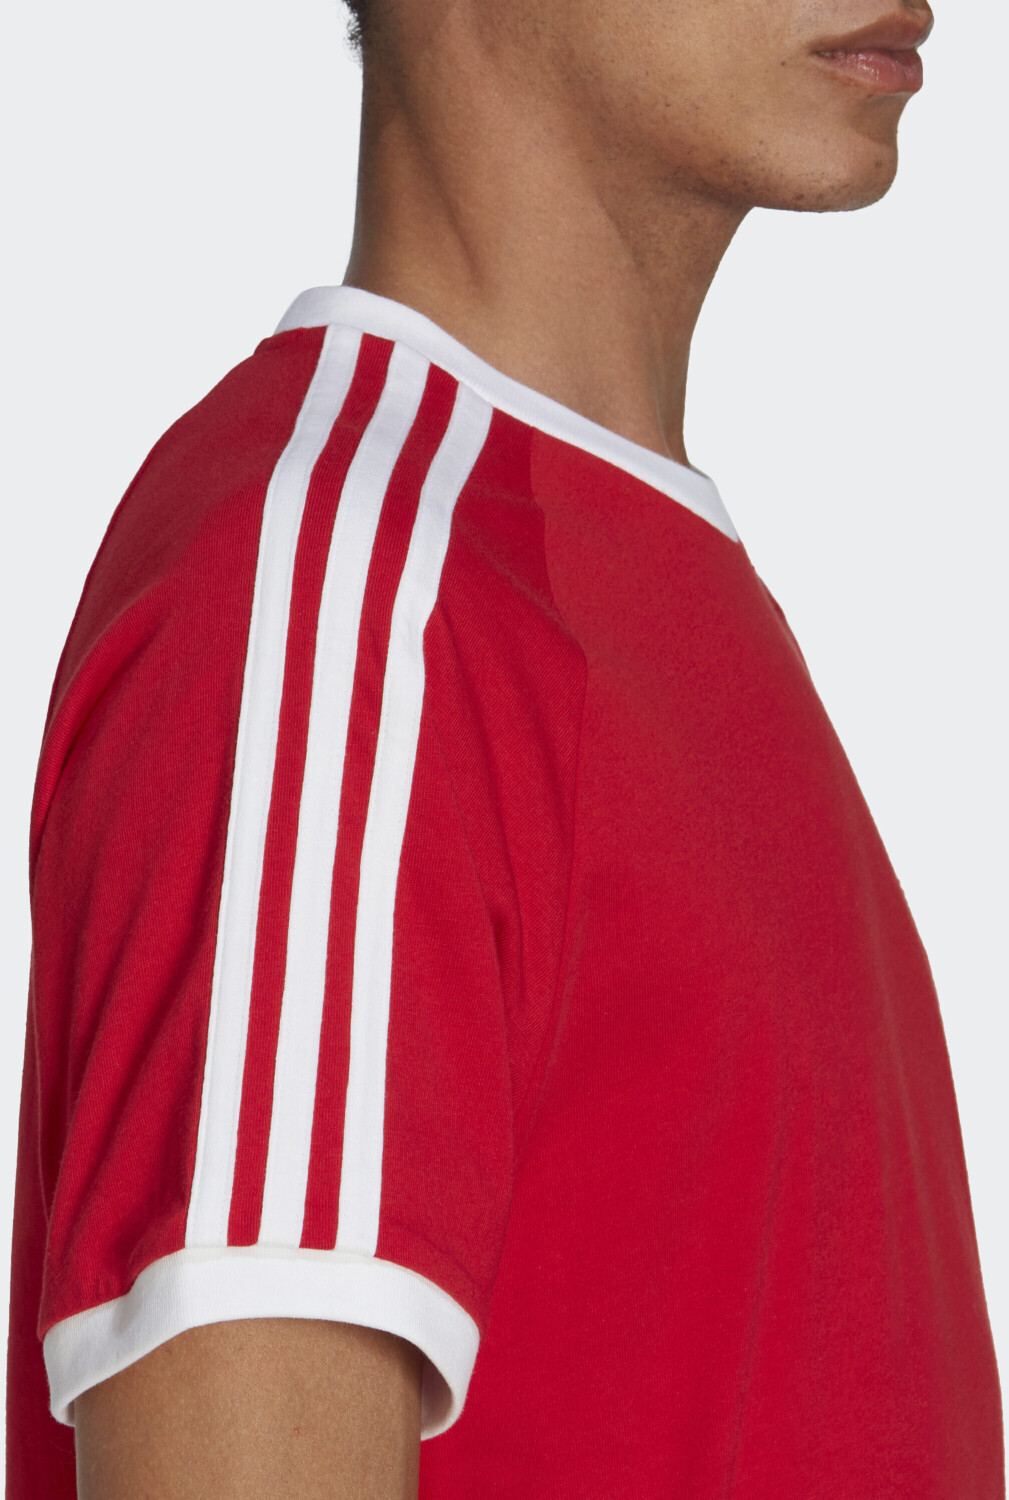 Buy Adidas Adicolor Classics 3-Stripes T-Shirt better scarlet (IA4852) from  £27.99 (Today) – Best Deals on